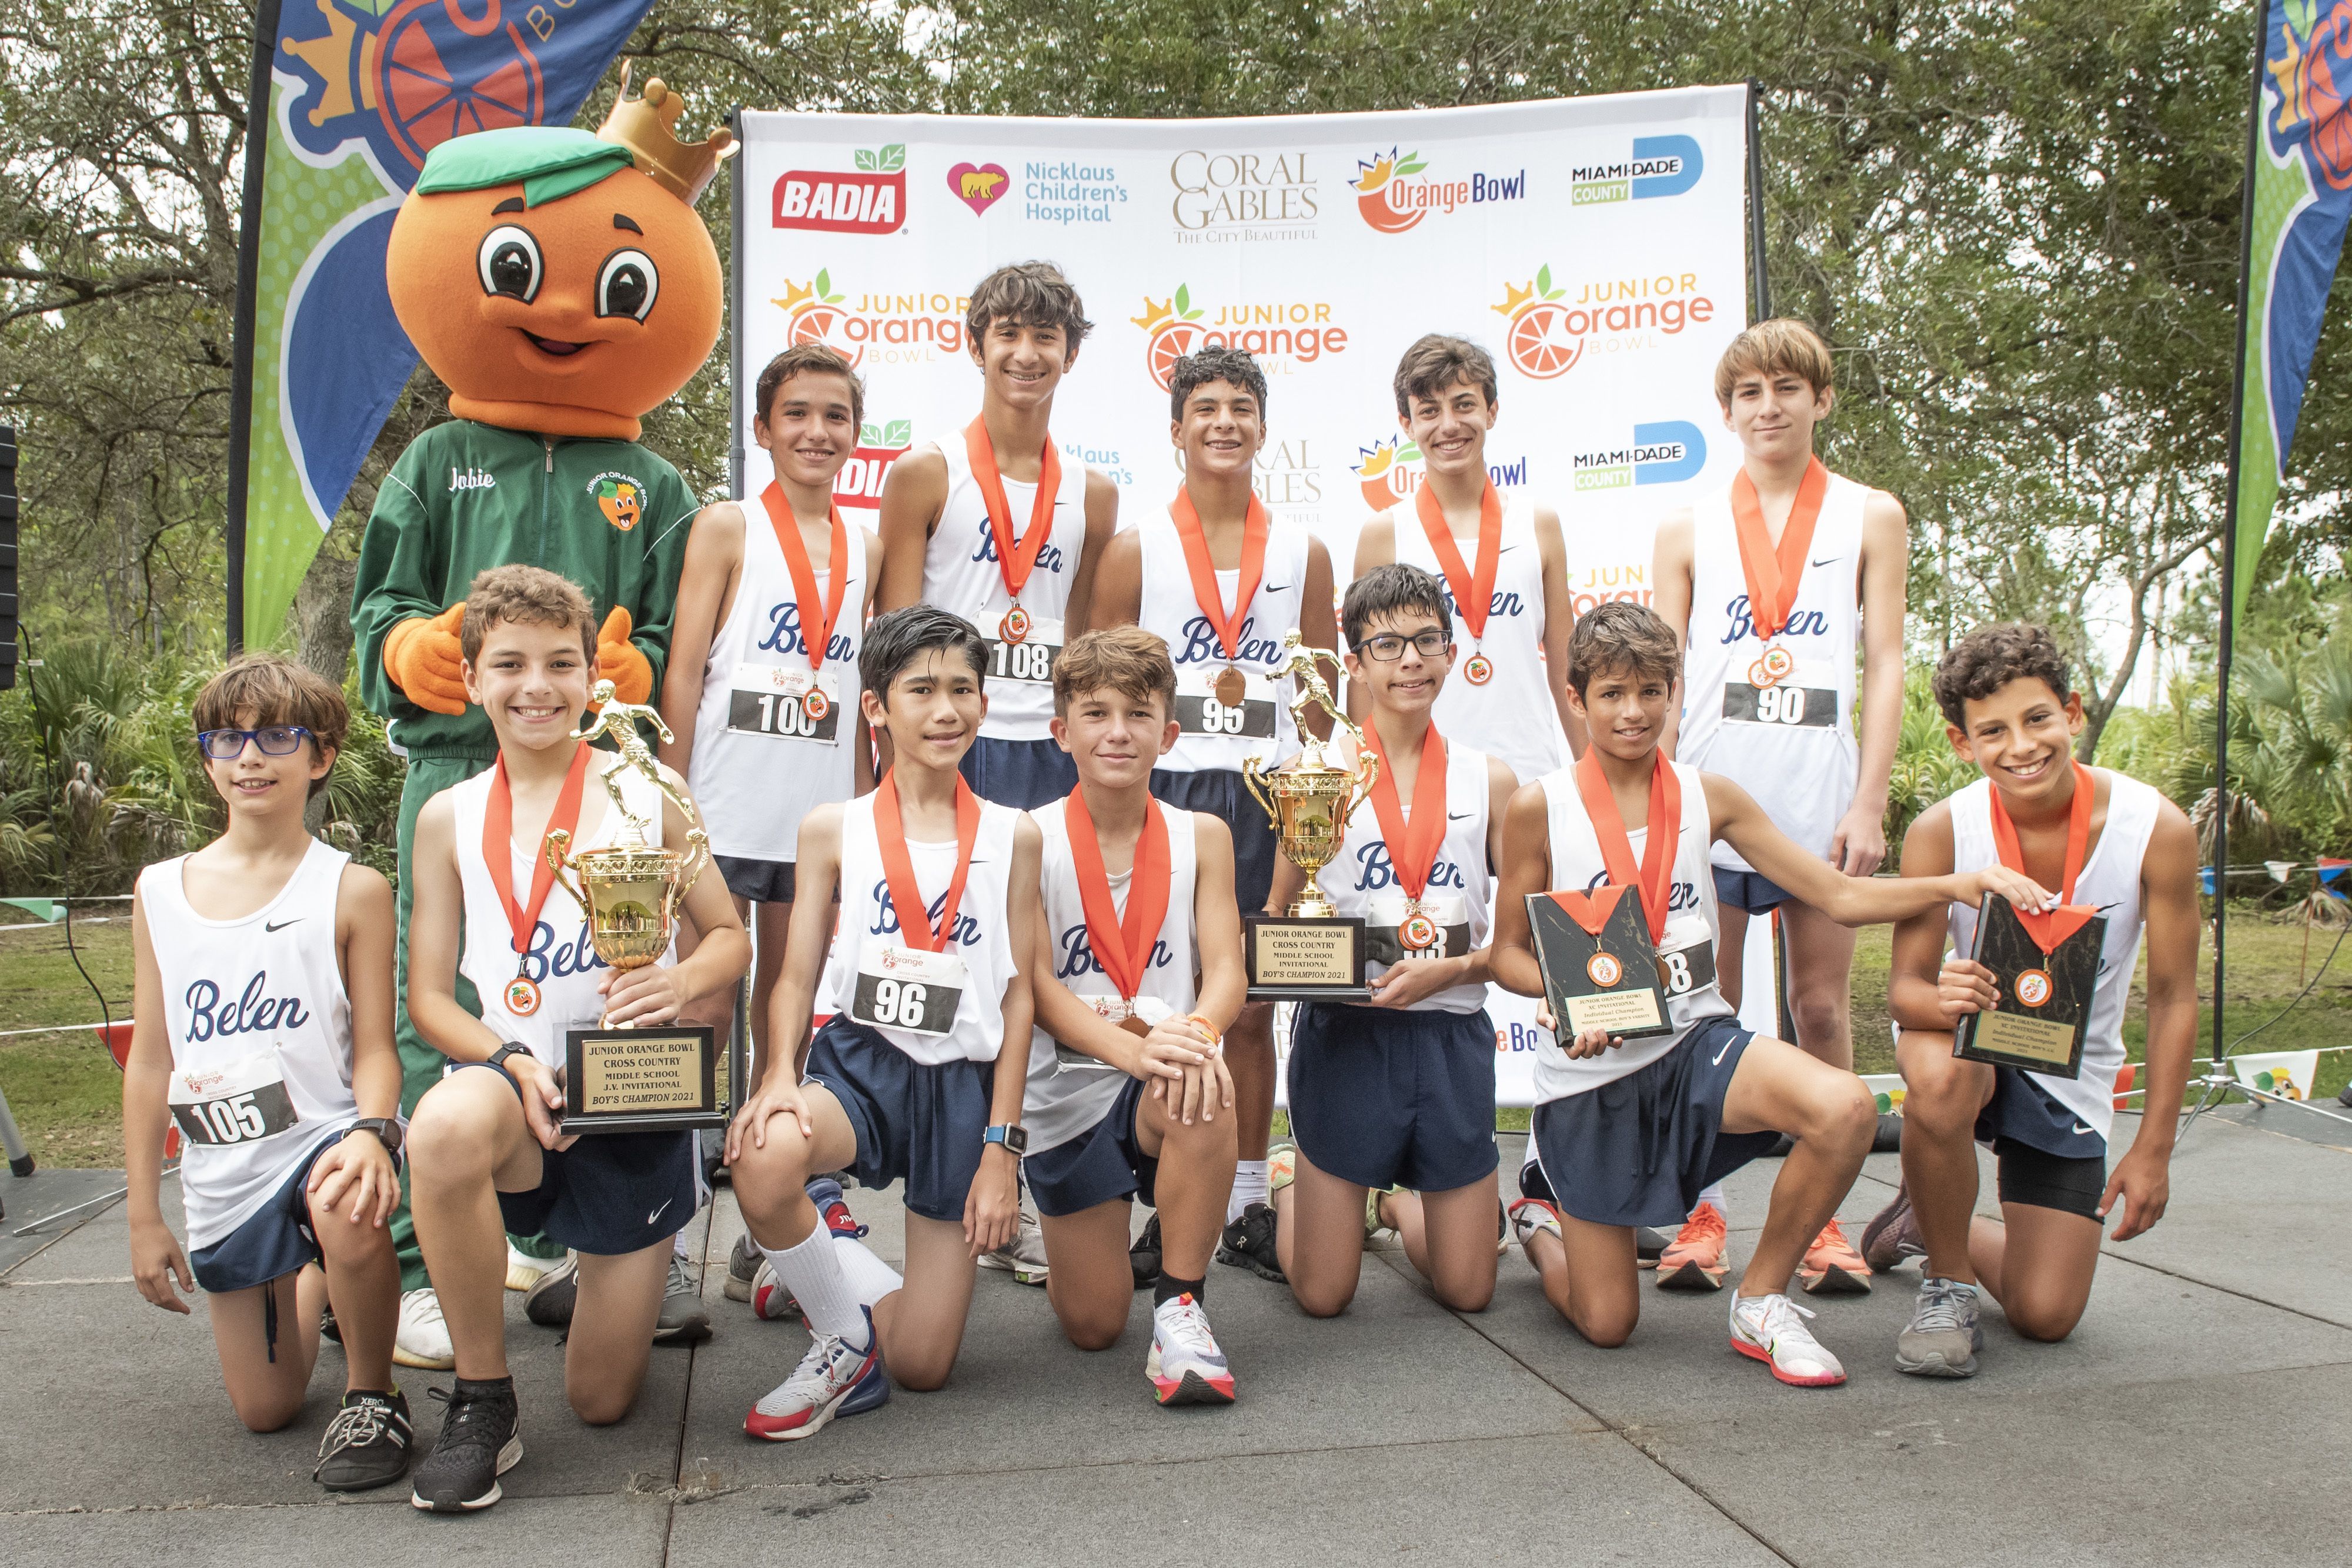 South Miami - Junior Orange Bowl events begin with Cross Country